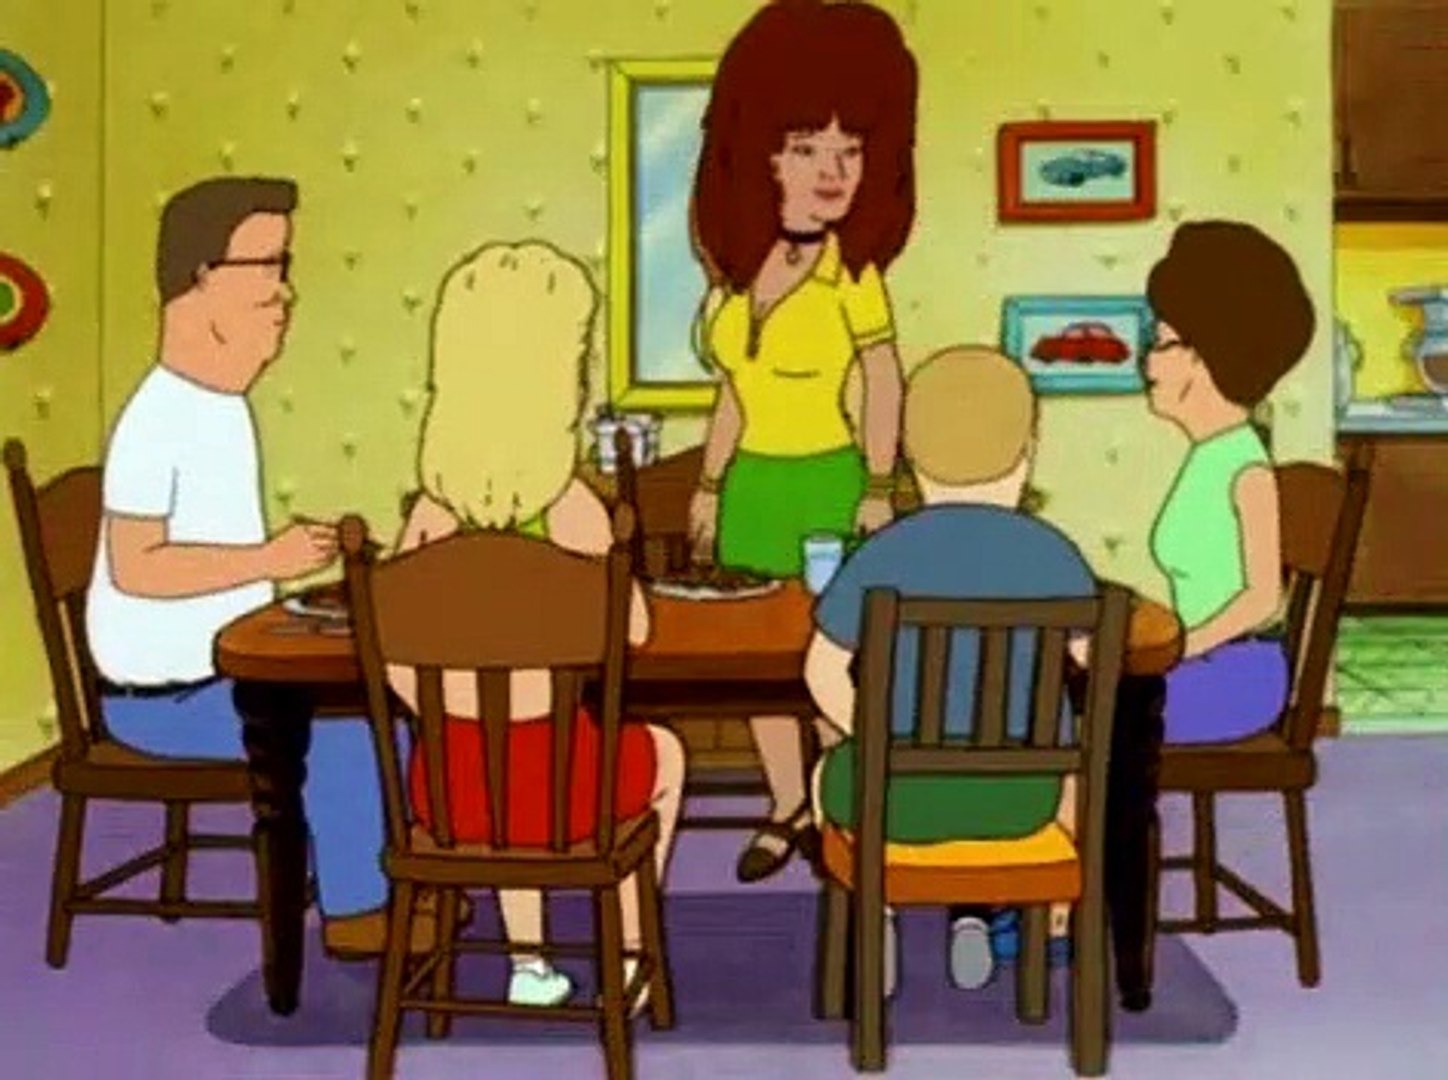 King Of The Hill Season 13 by Who's The Boss - Dailymotion